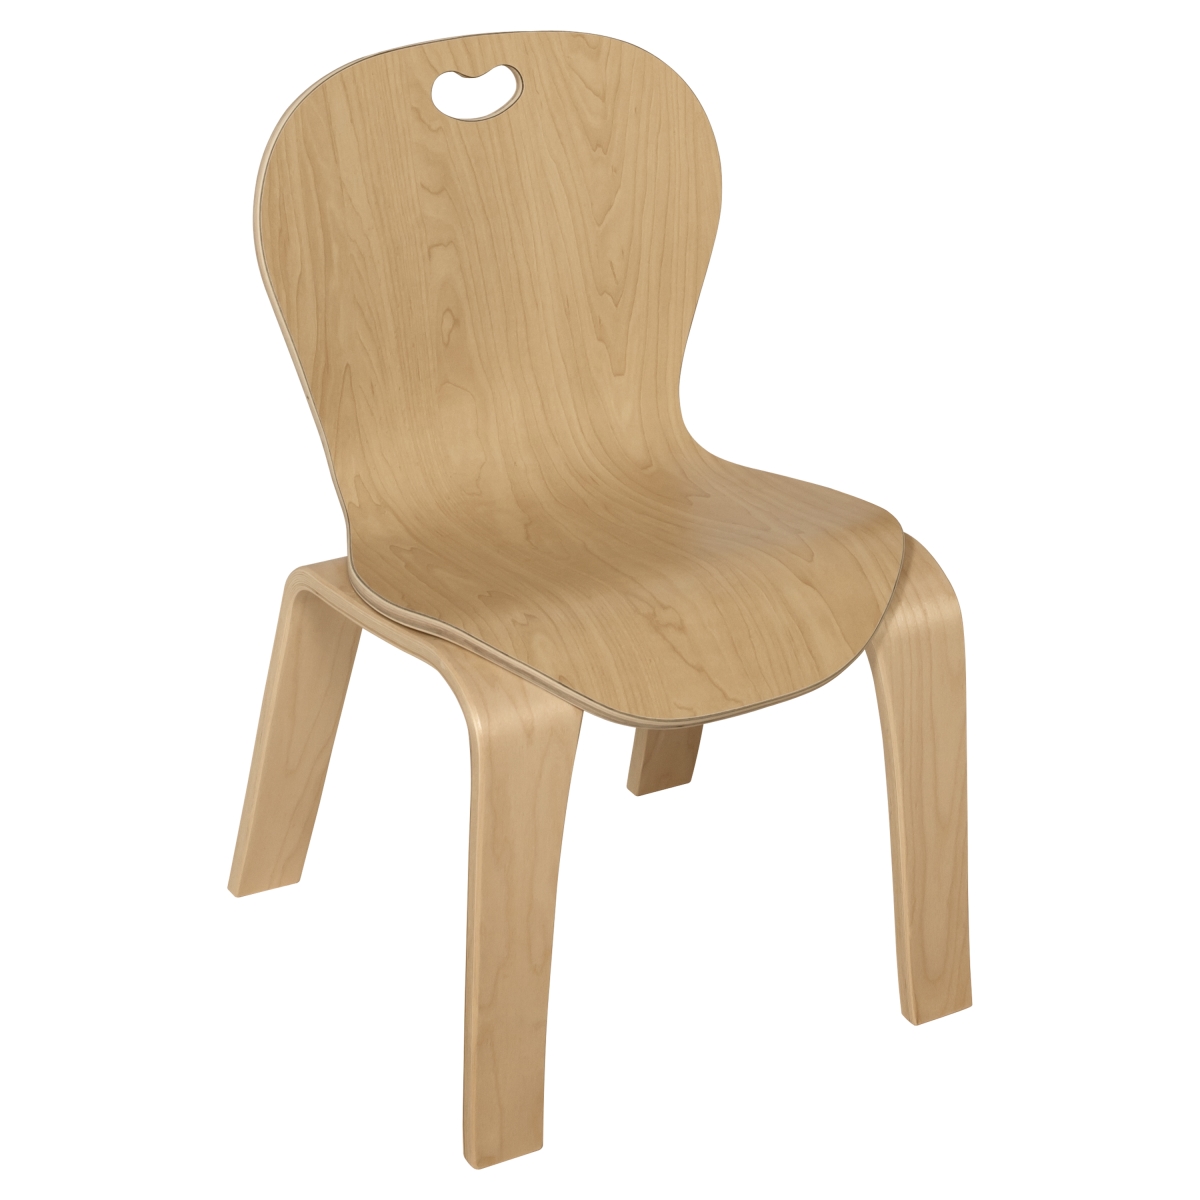 Mh881401 14 In. Bentwood Kids Chair